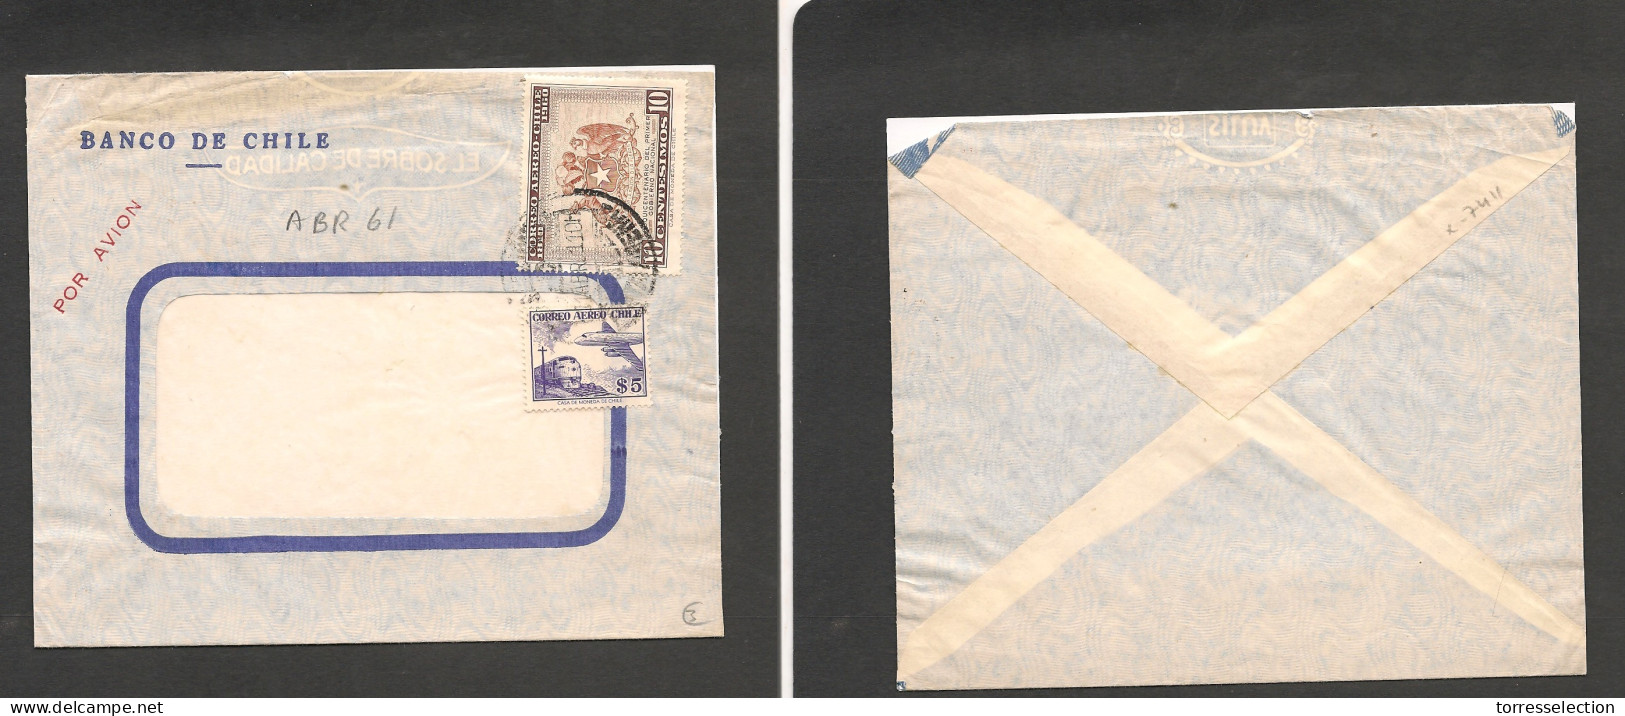 CHILE. Chile - Cover -1961 11 Abr Stgo To USA? Air Fkd Env $15 Rate Ex-Prof West UK Airmails Coll.- . Easy Deal. XSALE. - Chili